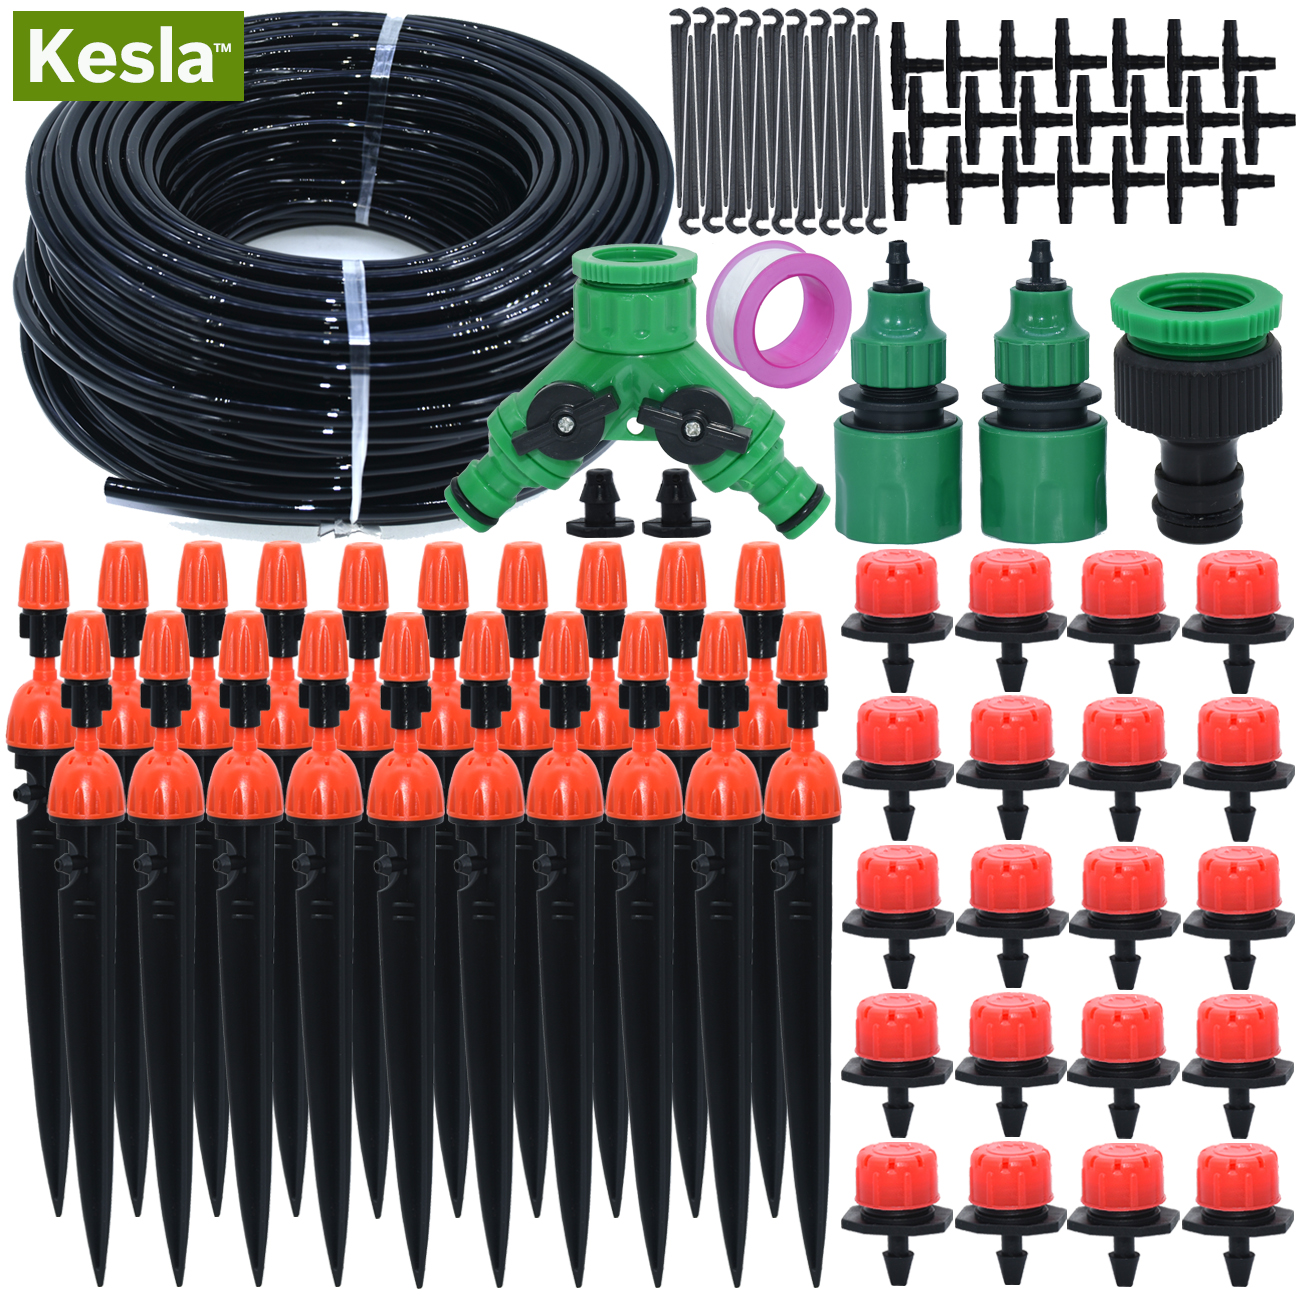 KESLA 5M-30M Drip Irrigation Watering Kits System Garden Greenhouse Automatic Adjustable Drippers 8 Outlets Sprinkler 4/7mm Hose